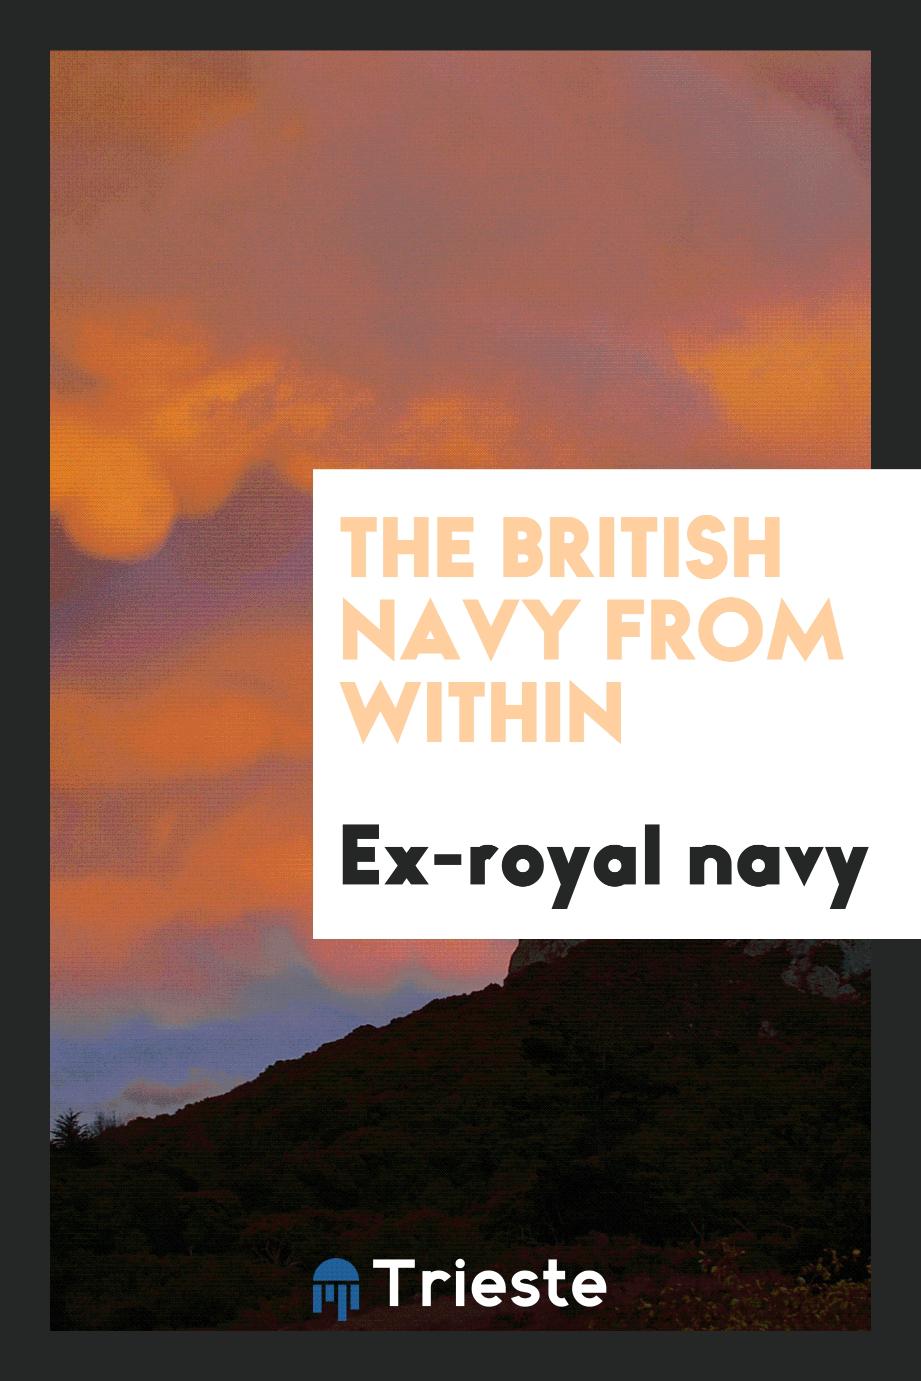 The British Navy from within